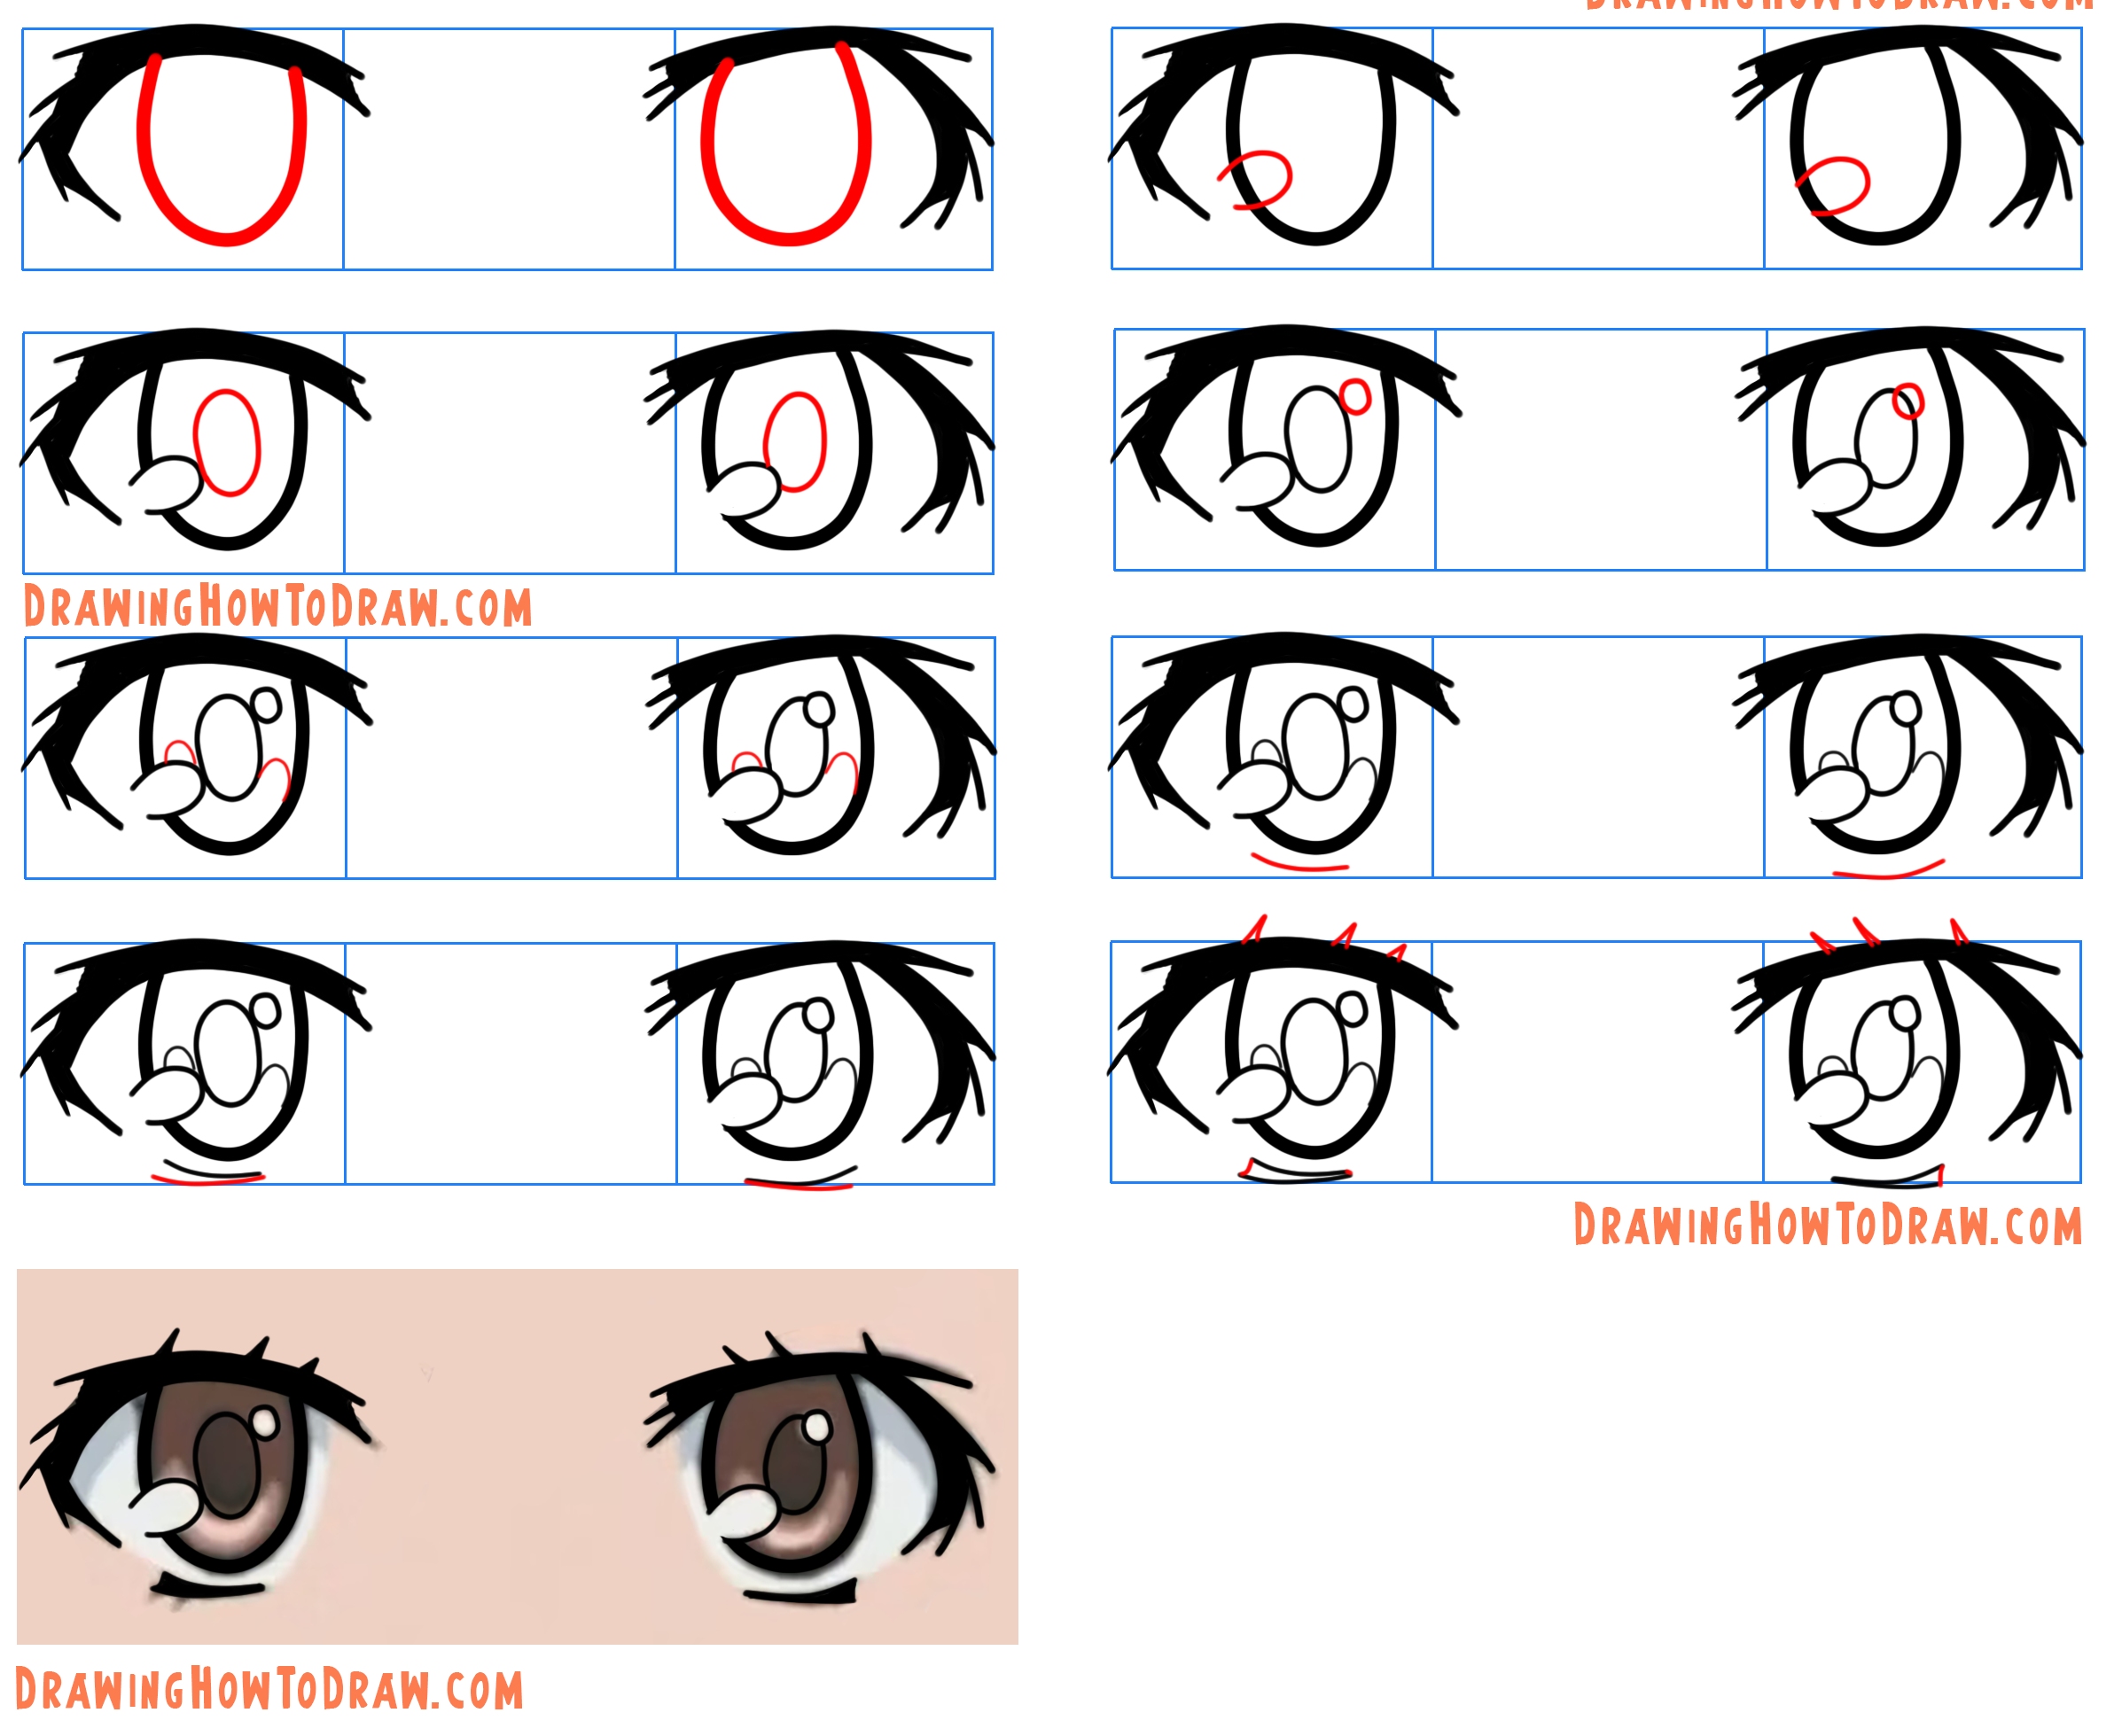 How to draw anime eyes step by step